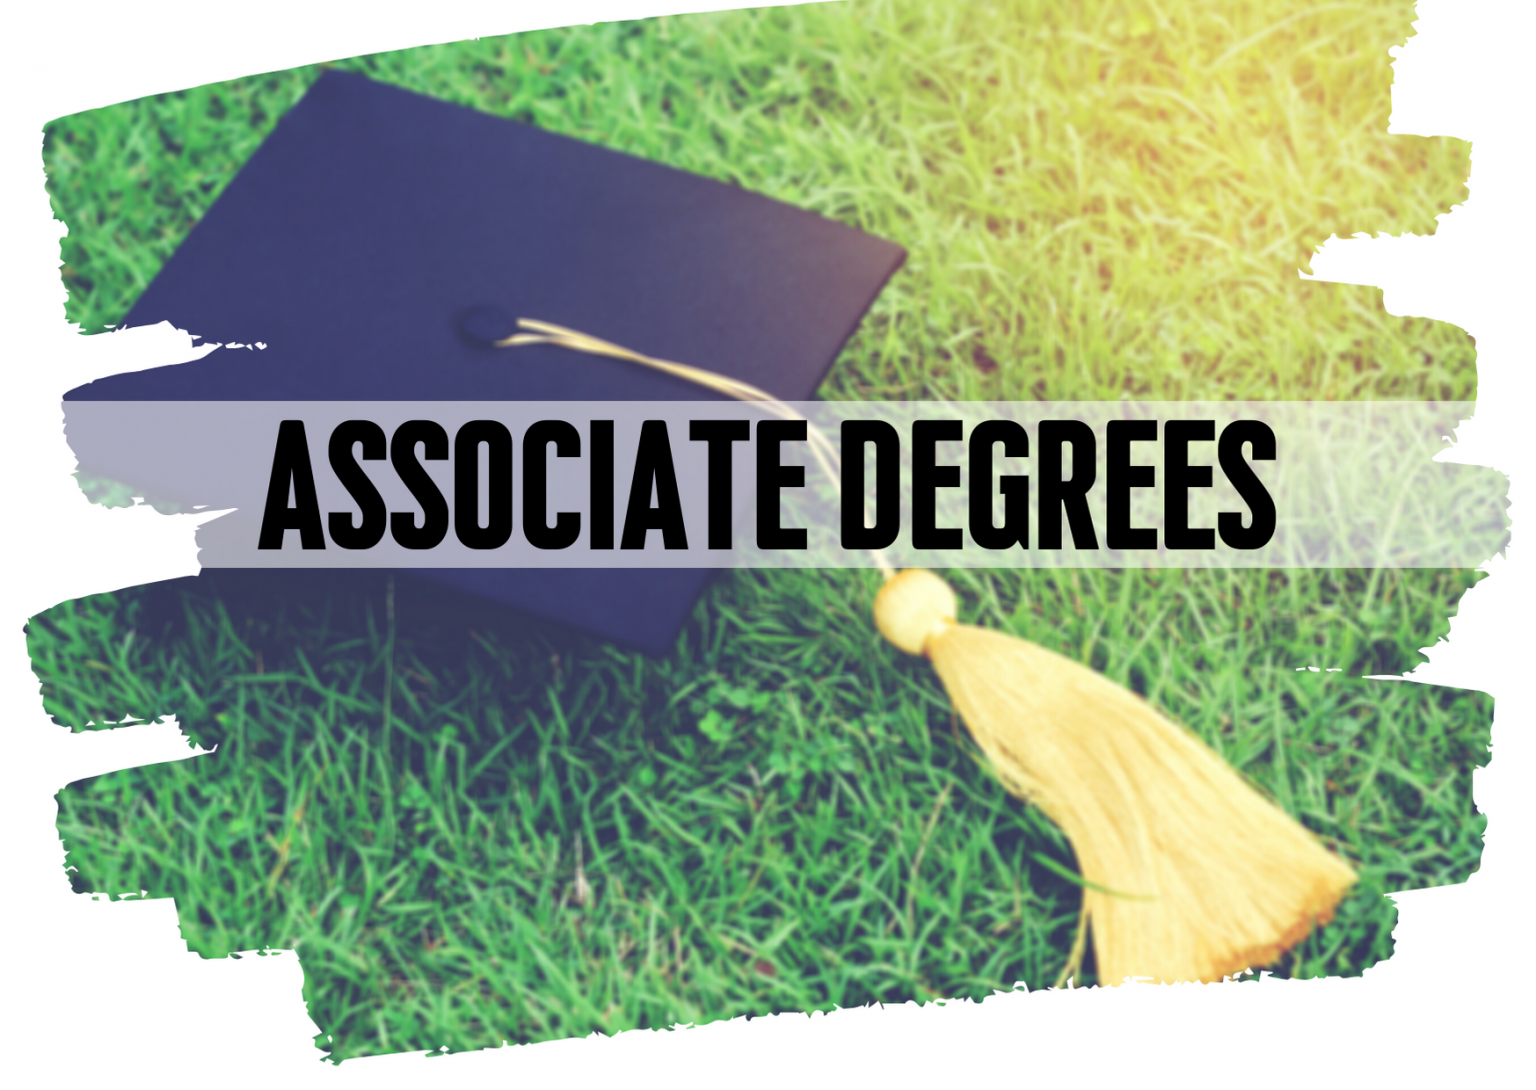 is an associate's degree just general education